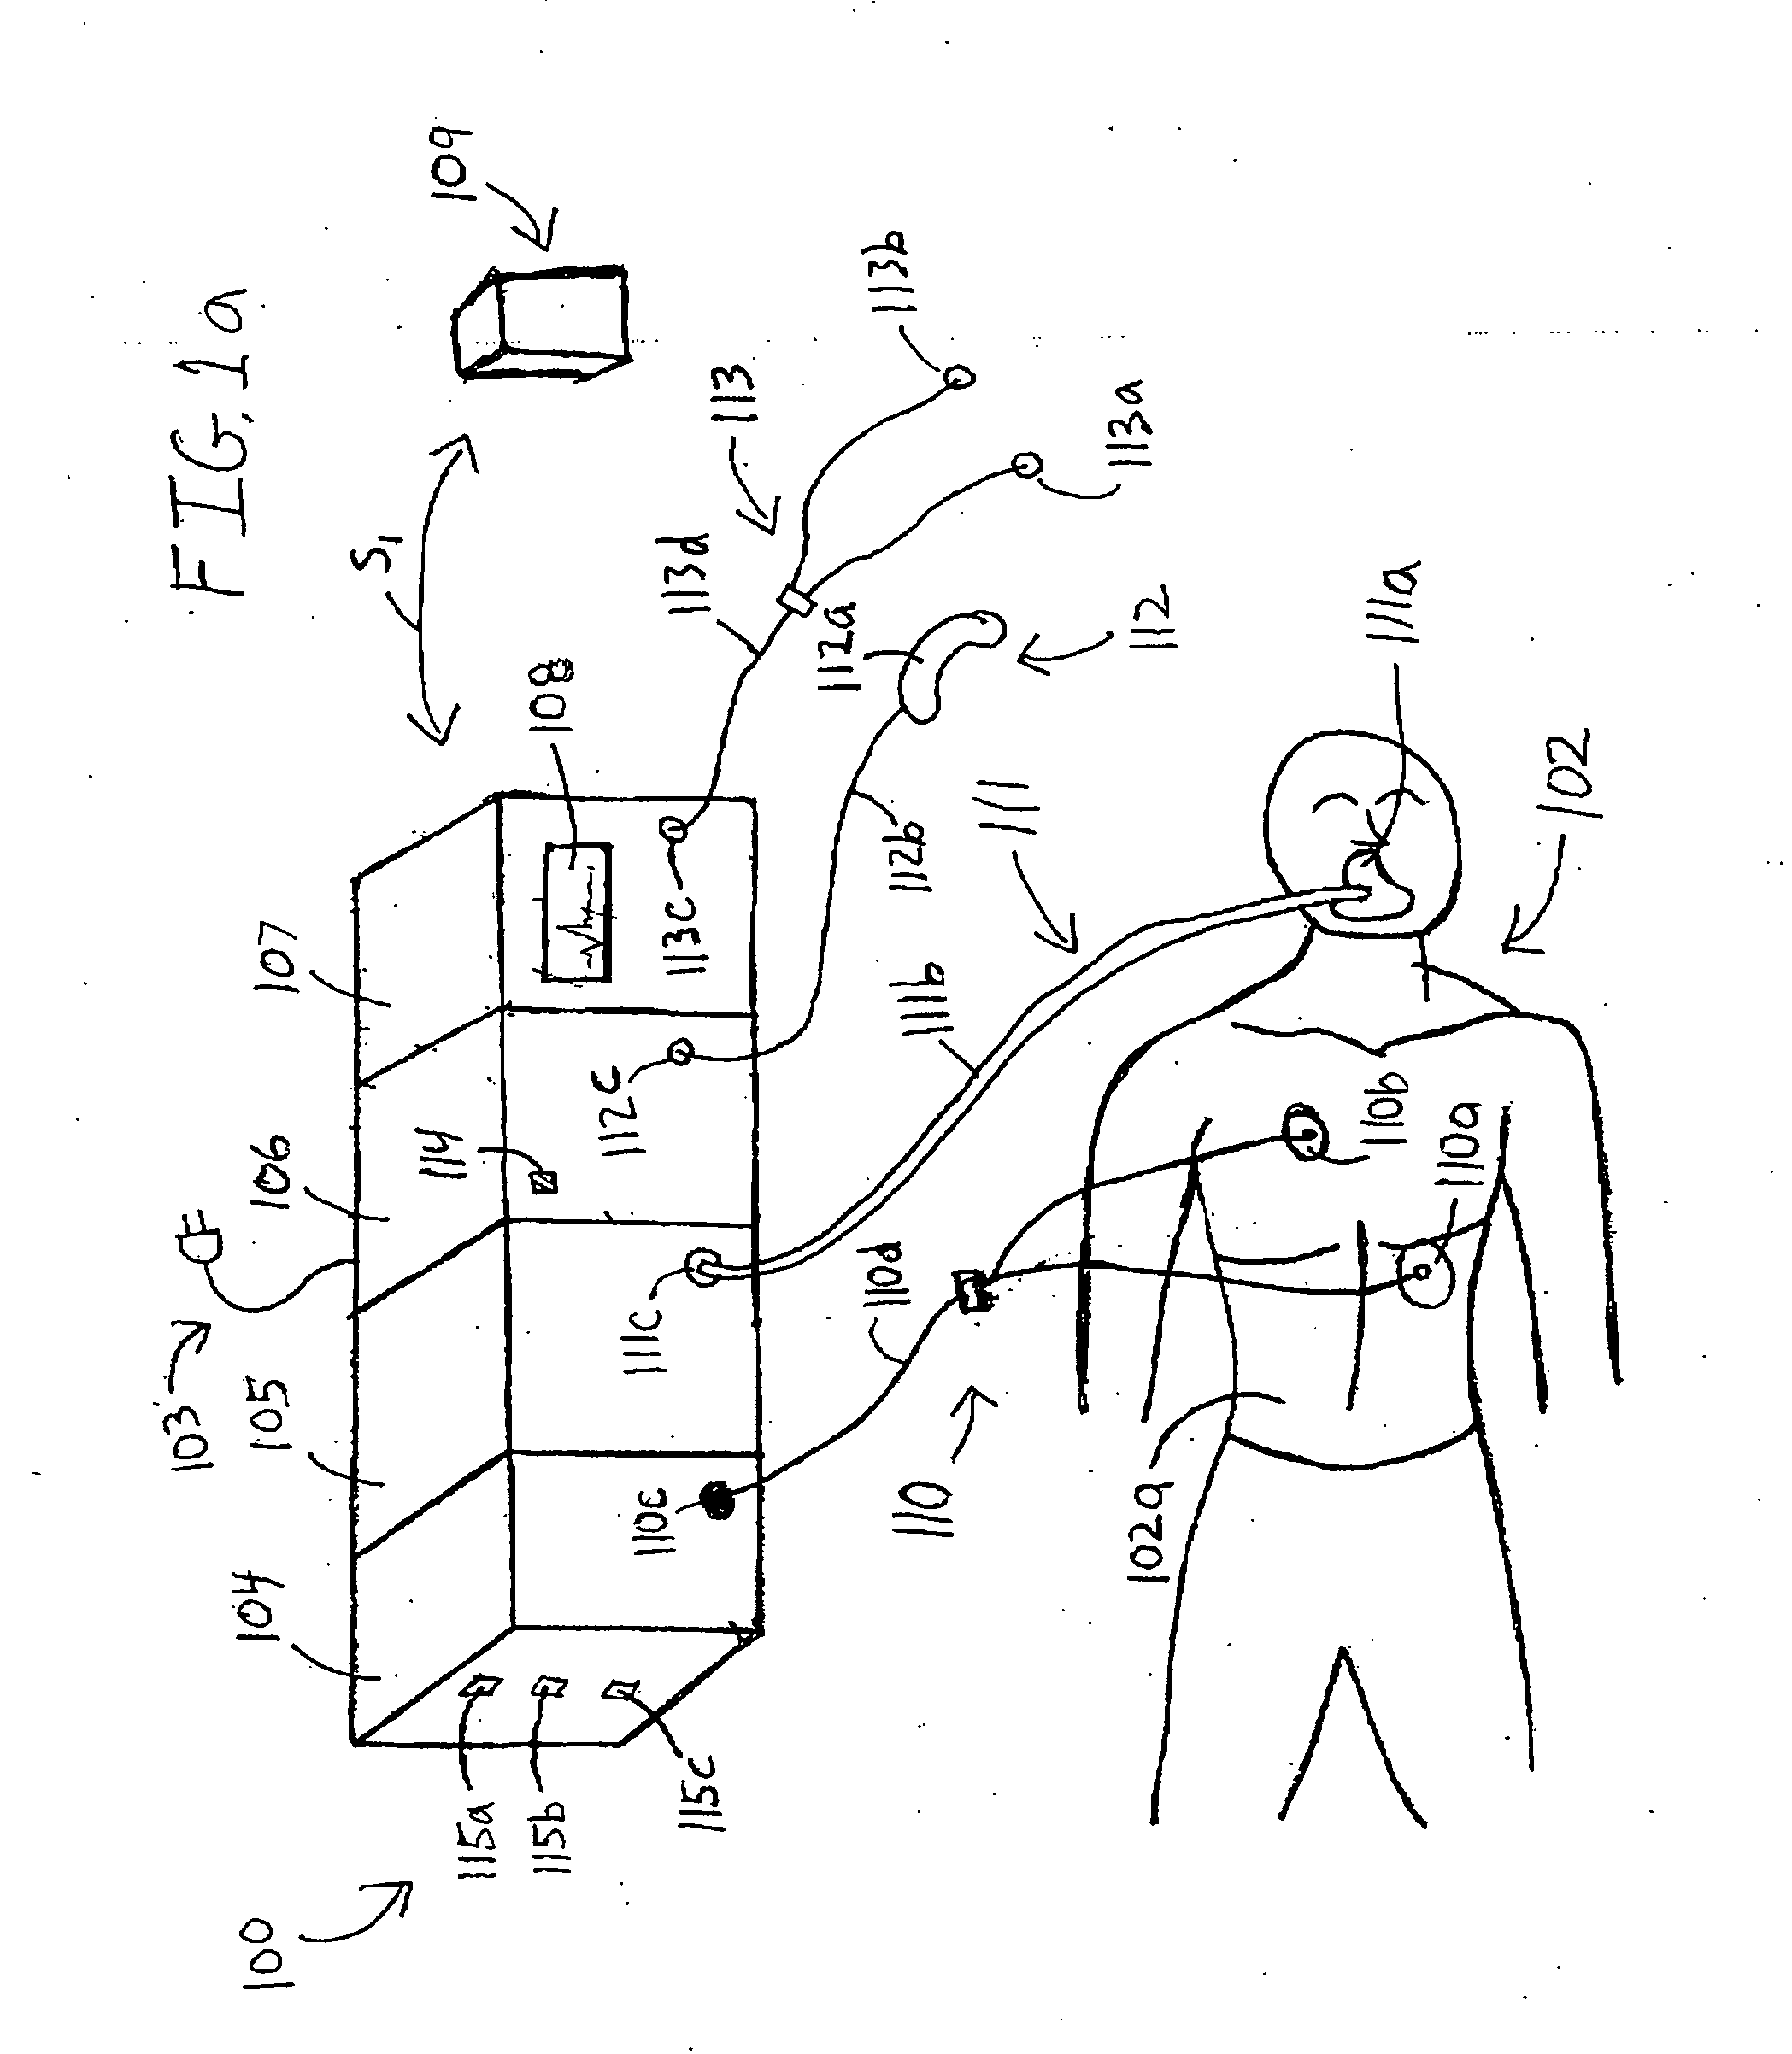 Resuscitation and life support system, method and apparatus